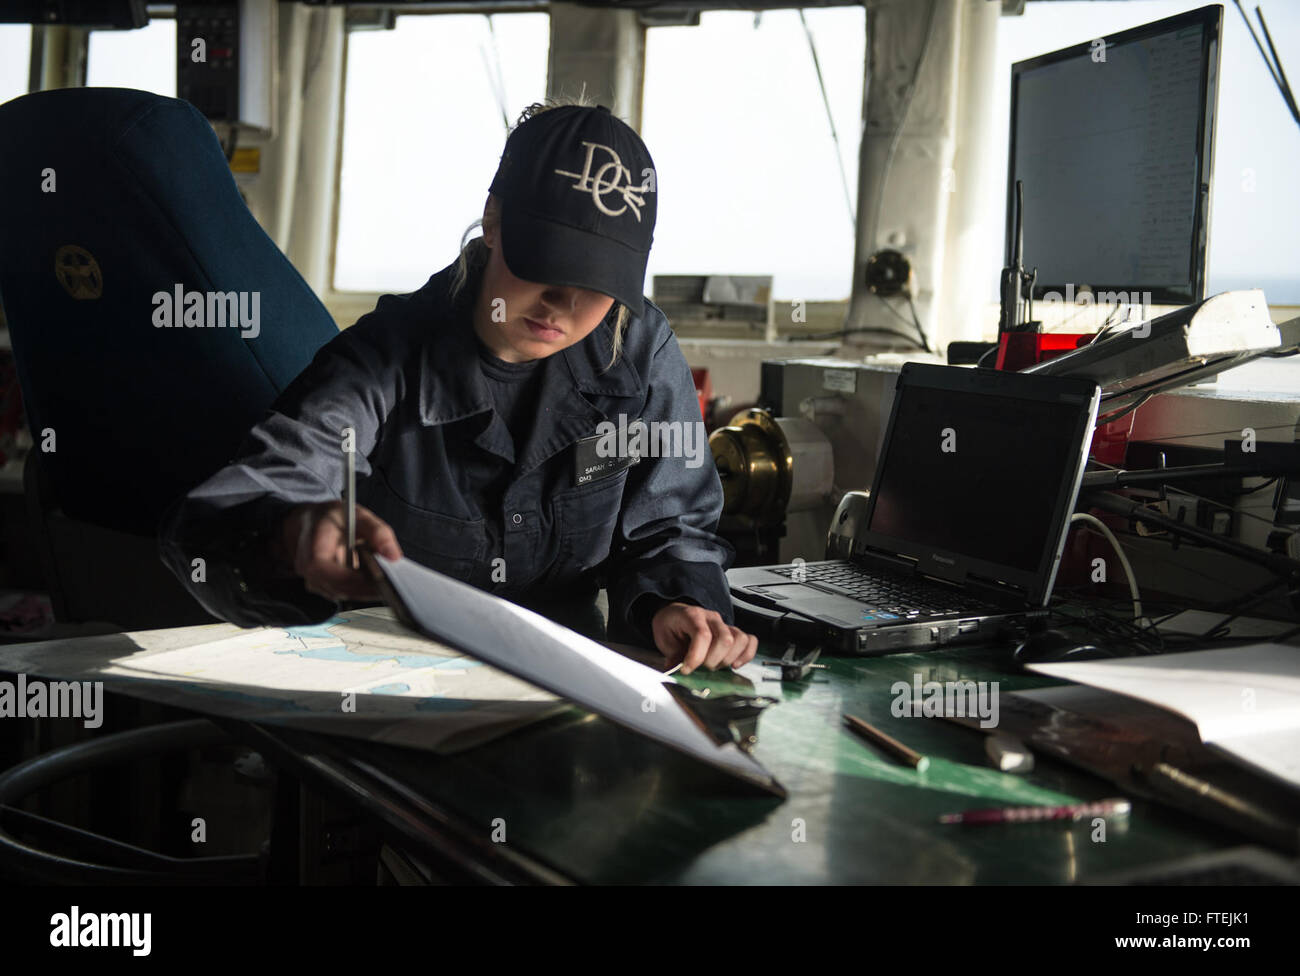 MEDITERRANEAN SEA (Dec. 13, 2014) Quartermaster 3rd Class Sarah Watson, from Douglasville, Georgia, plots a course on a chart in the bridge aboard USS Donald Cook (DDG 75). Donald Cook, an Arleigh Burke-class guided-missile destroyer, forward-deployed to Rota, Spain, is conducting naval operations in the U.S. 6th Fleet area of operations in support of U.S. national security interests in Europe. Stock Photo